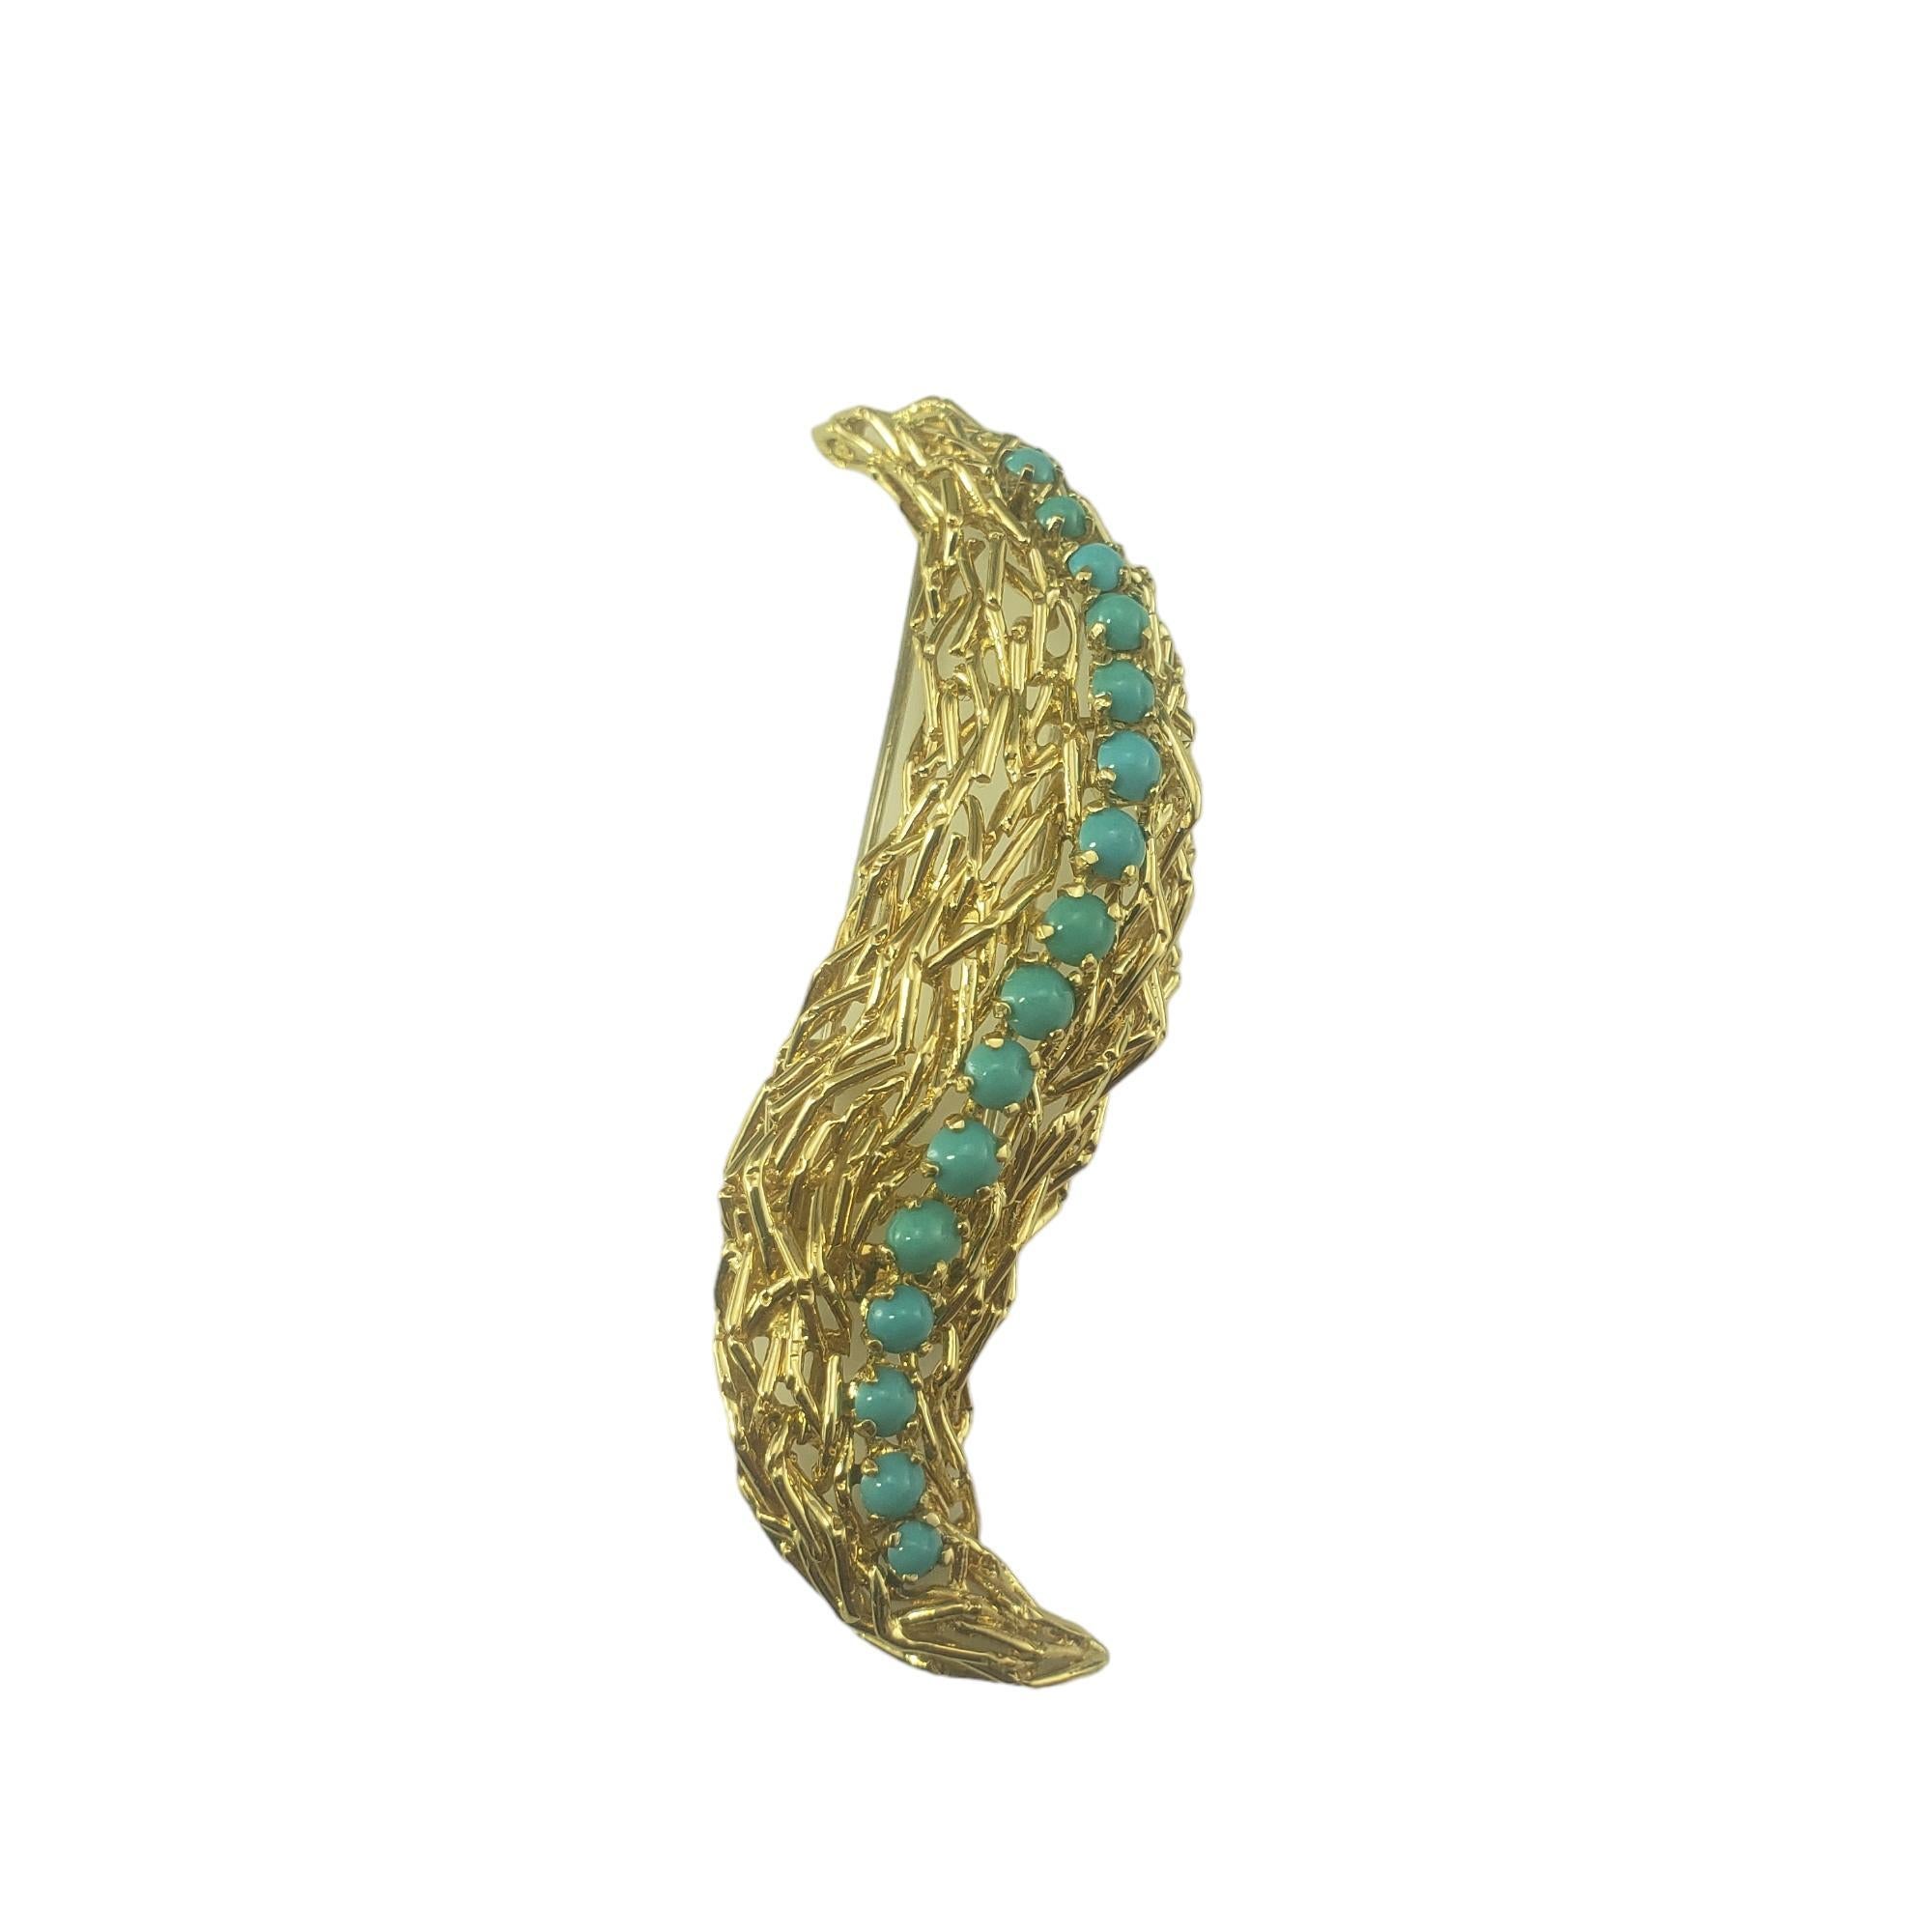 Vintage Tiffany & Co. 18 Karat Yellow Gold and Turquoise Brooch/Pin-

This magnificent brooch by Tiffany & Co. features 16 turquoise stones set in beautifully detailed 18K yellow gold.  

Size: 2.8 inches x .70 inches

Hallmark:  Tiffany & Co. 